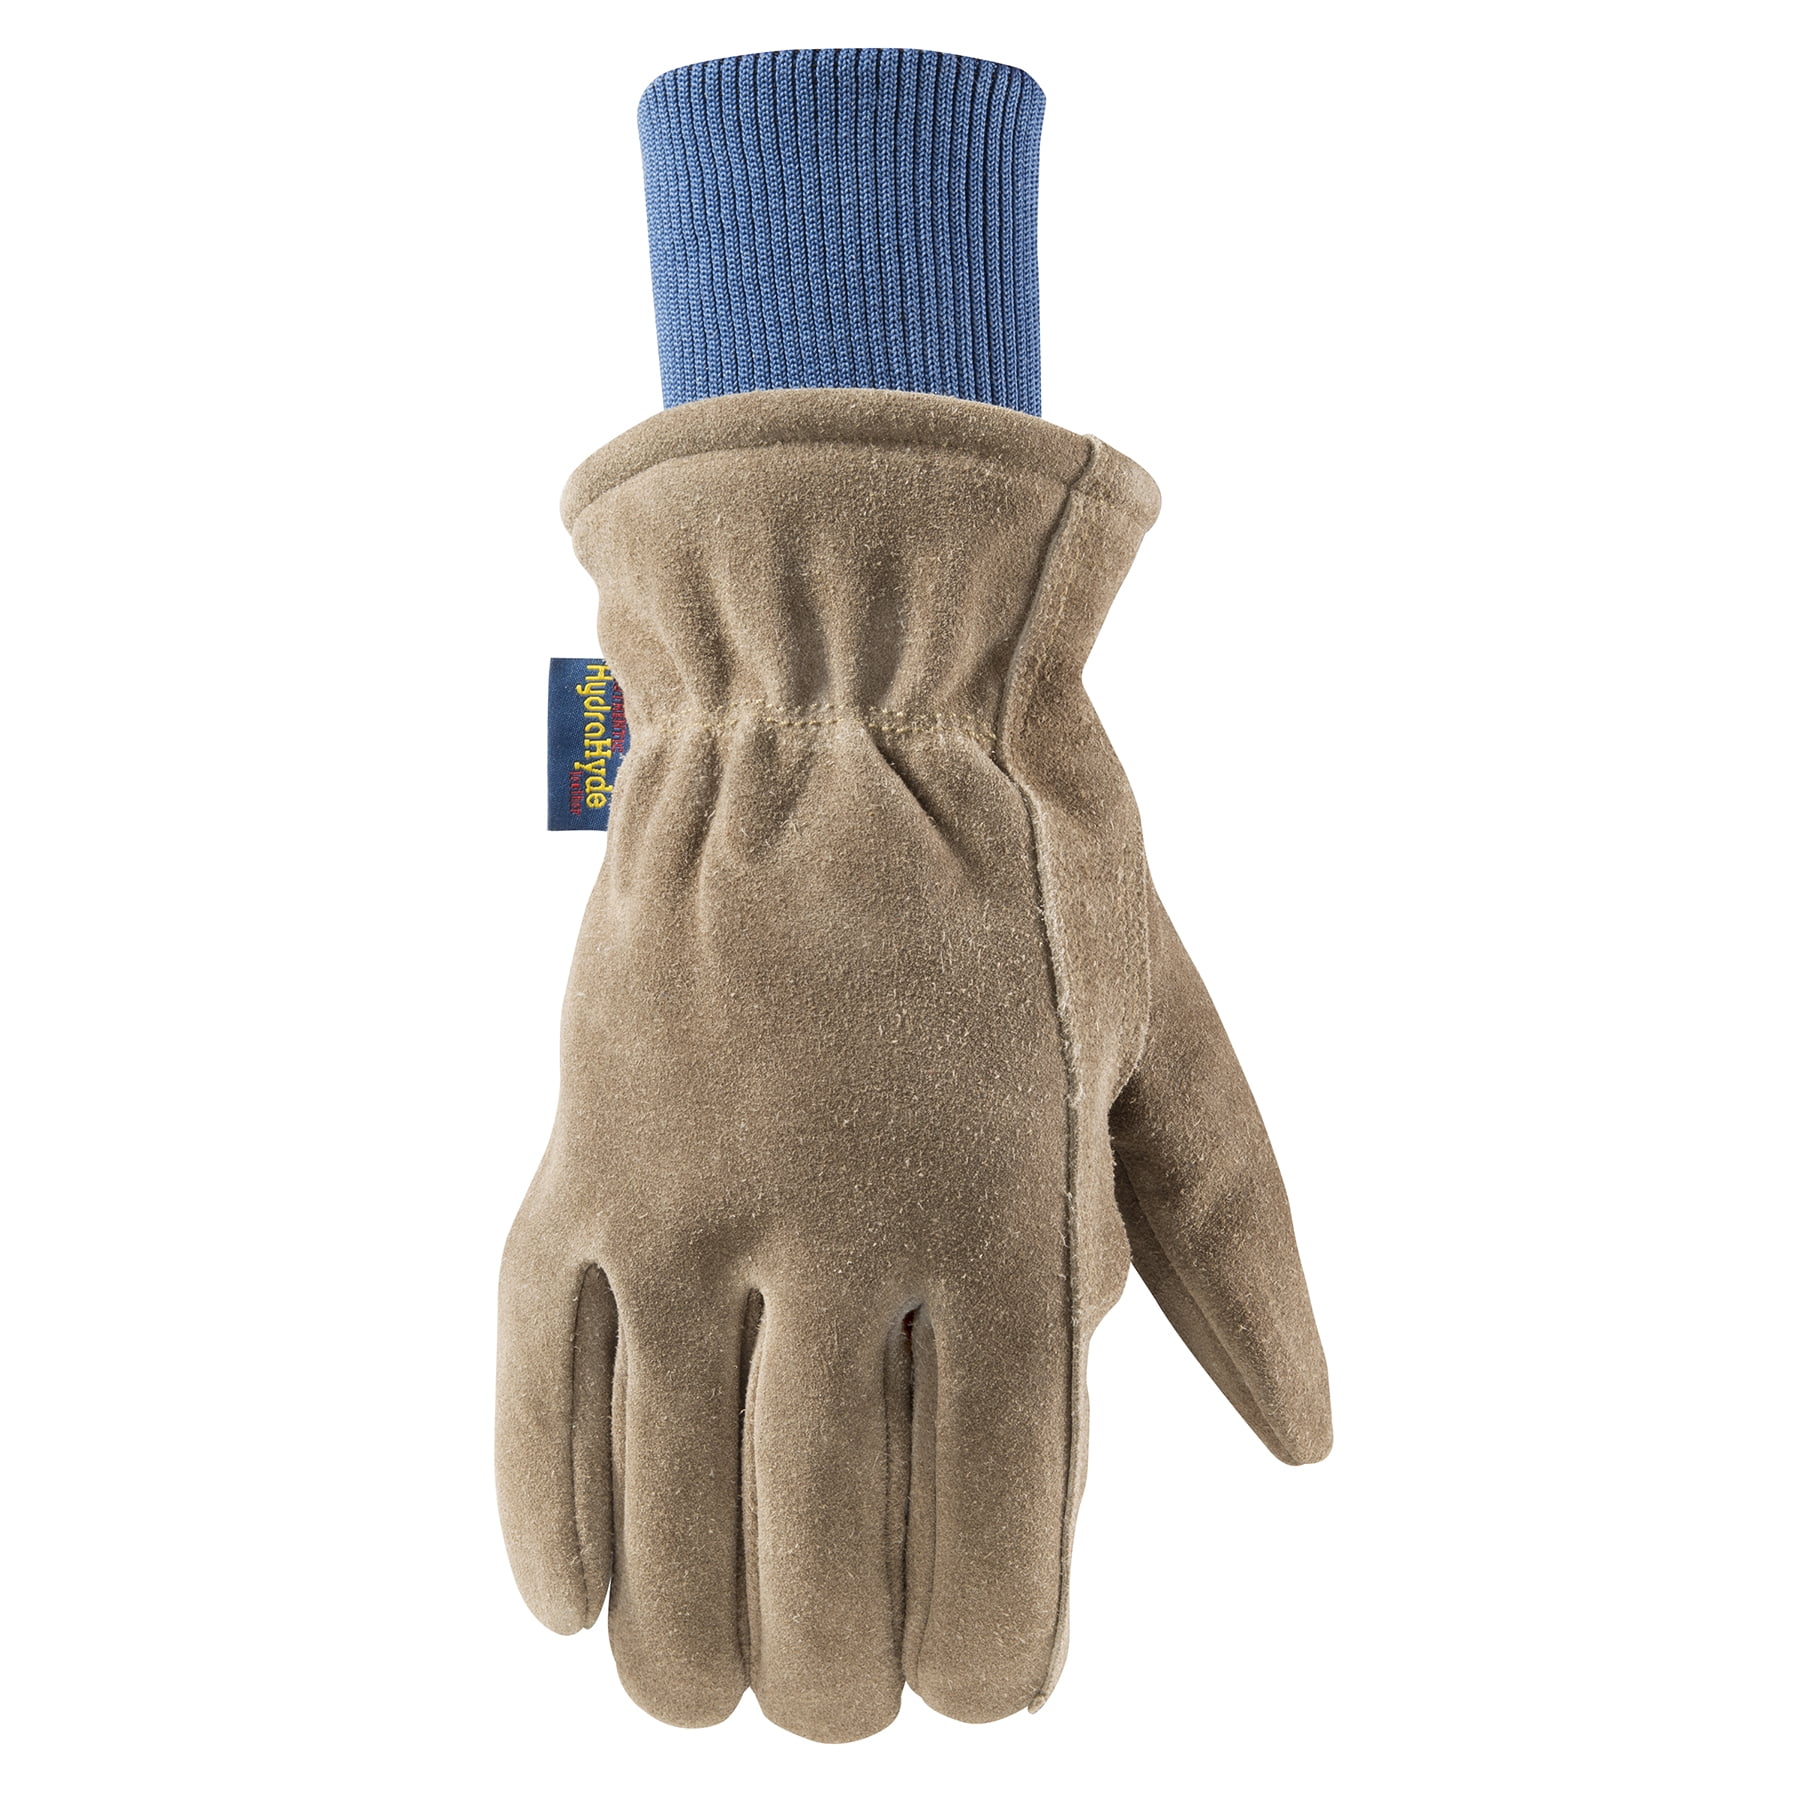 Wells Lamont 1196L Saddle Tan Large Lined HydraHyde Winter Leather Work Gloves